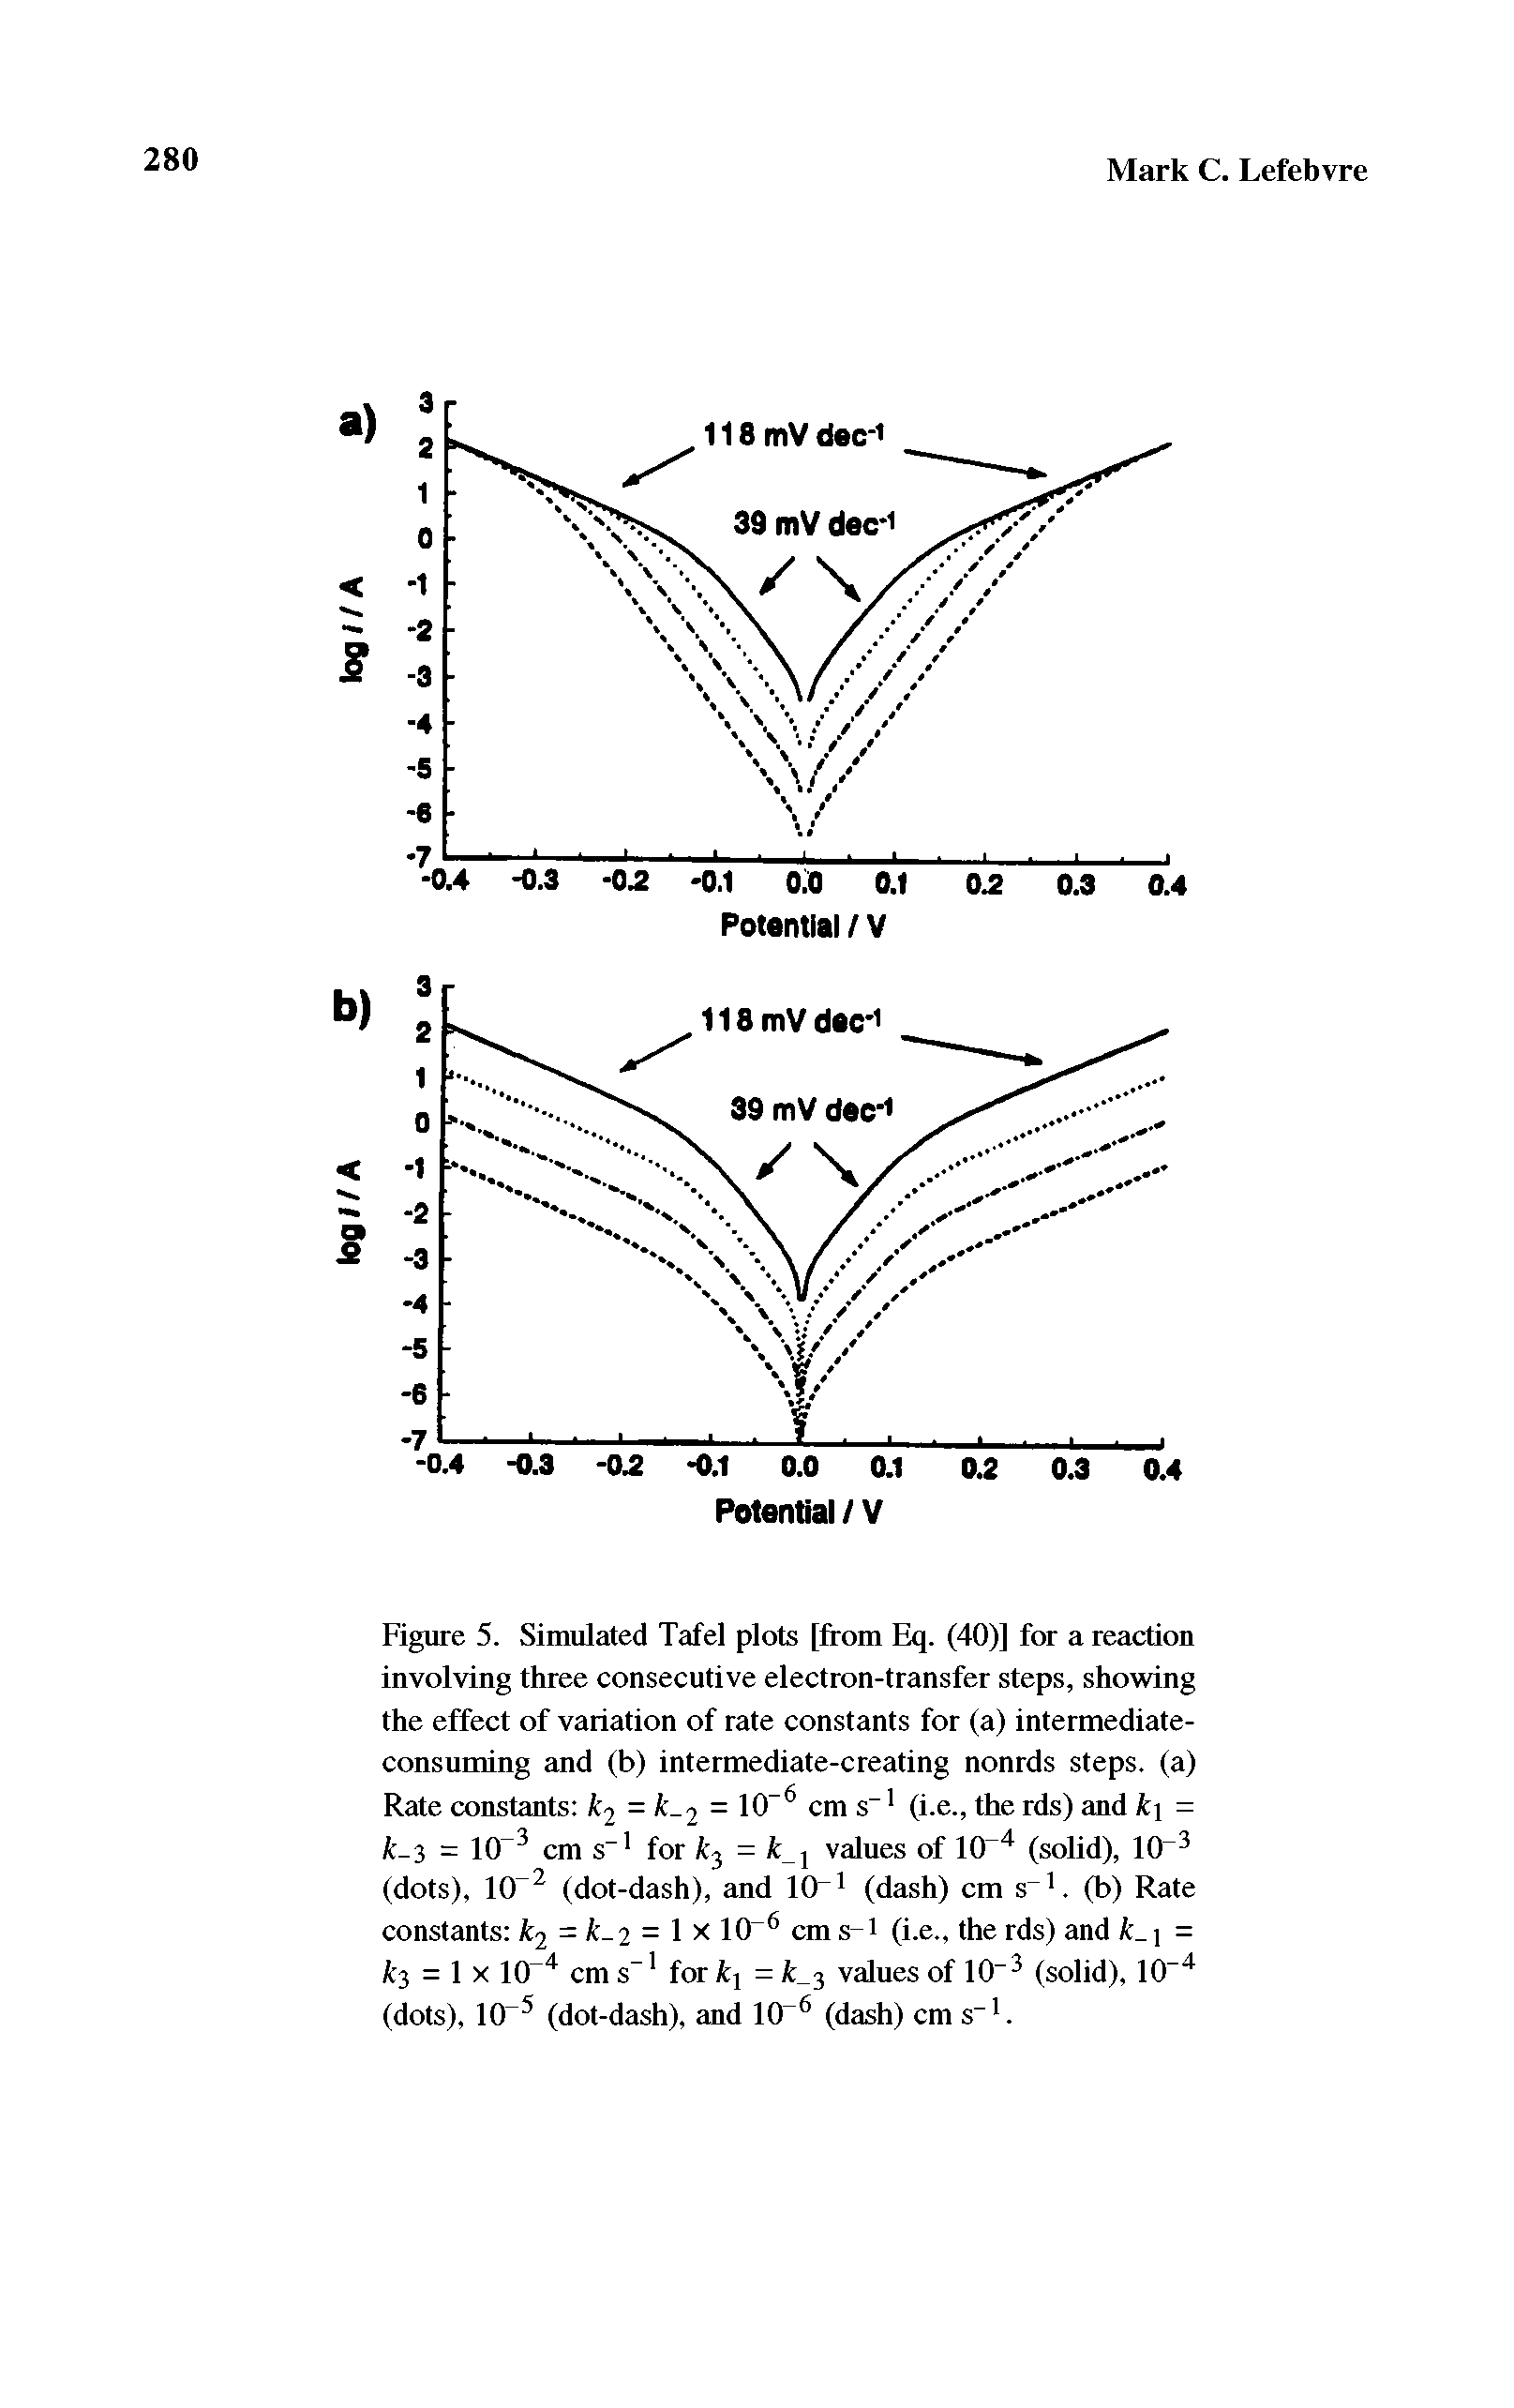 Figure 5. Simulated Tafel plots [from Eq. (40)] for a reaction involving three consecutive electron-transfer steps, showing the effect of variation of rate constants for (a) intermediate-consuming and (b) intermediate-creating nonrds steps, (a) Rate constants A, = -2 = 10 cm s (i.e., the rds) and k =...